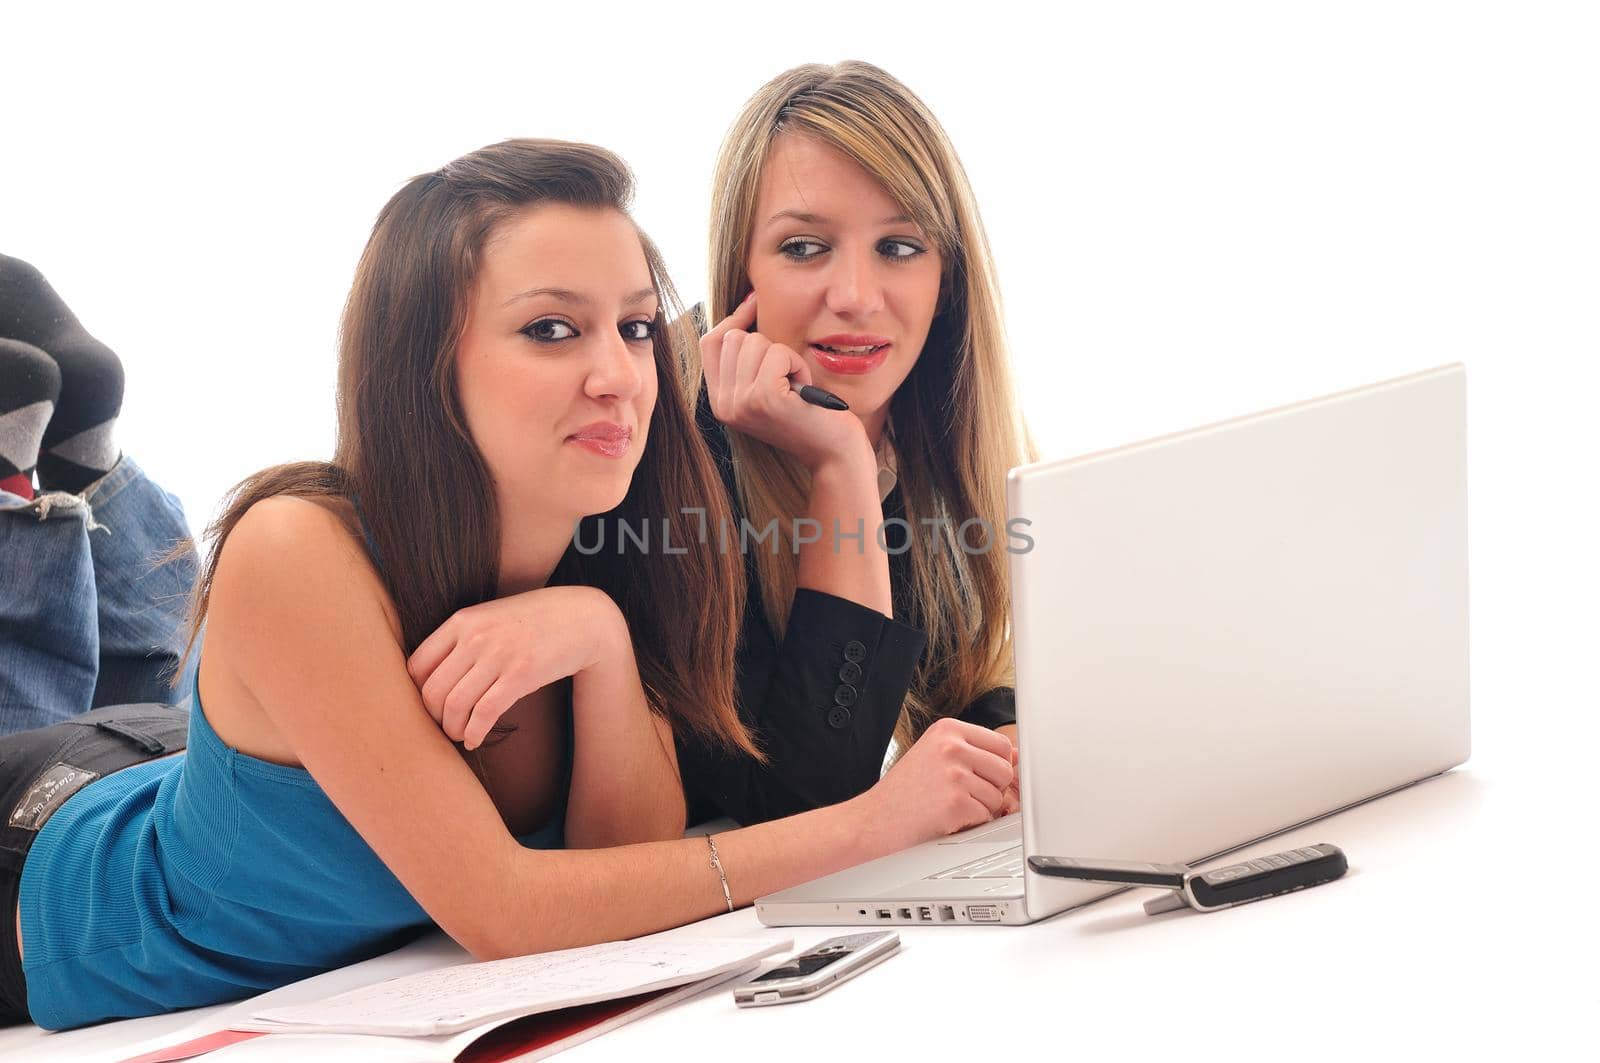 two young woman student work on laptop isolated